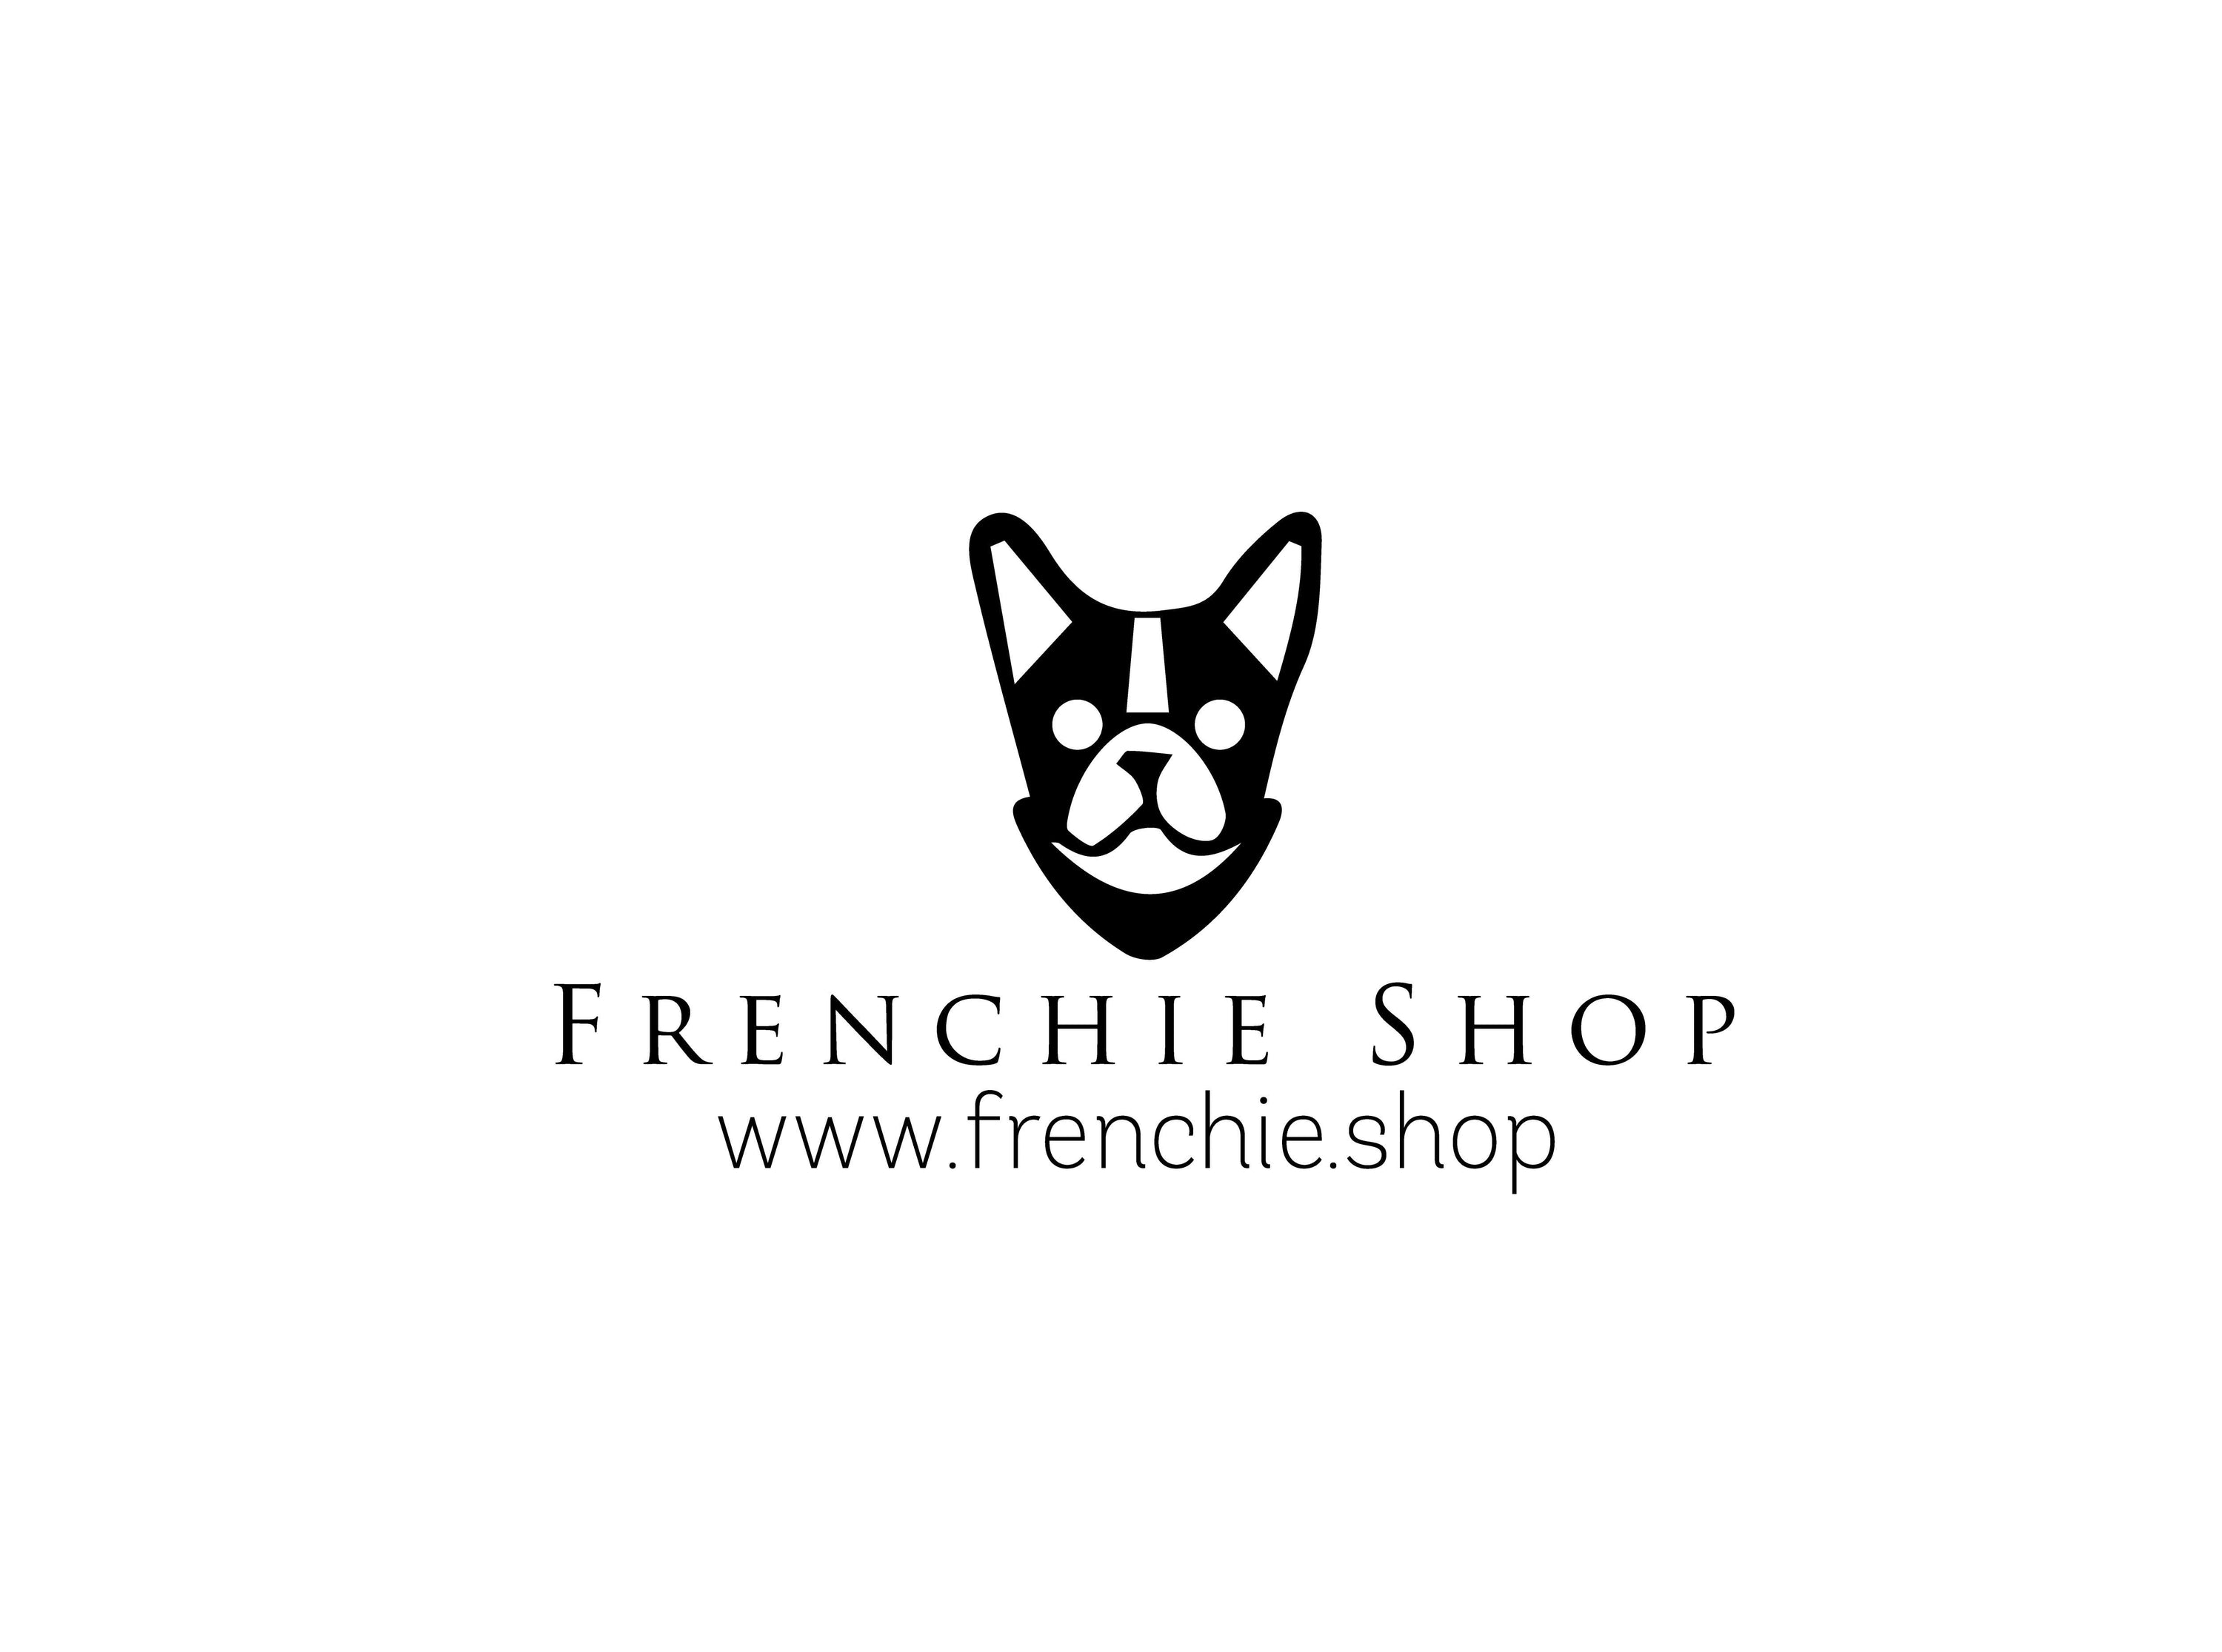 UPDATED FRENCHIE.SHOP 2019: Things You Should Know – frenchie Shop